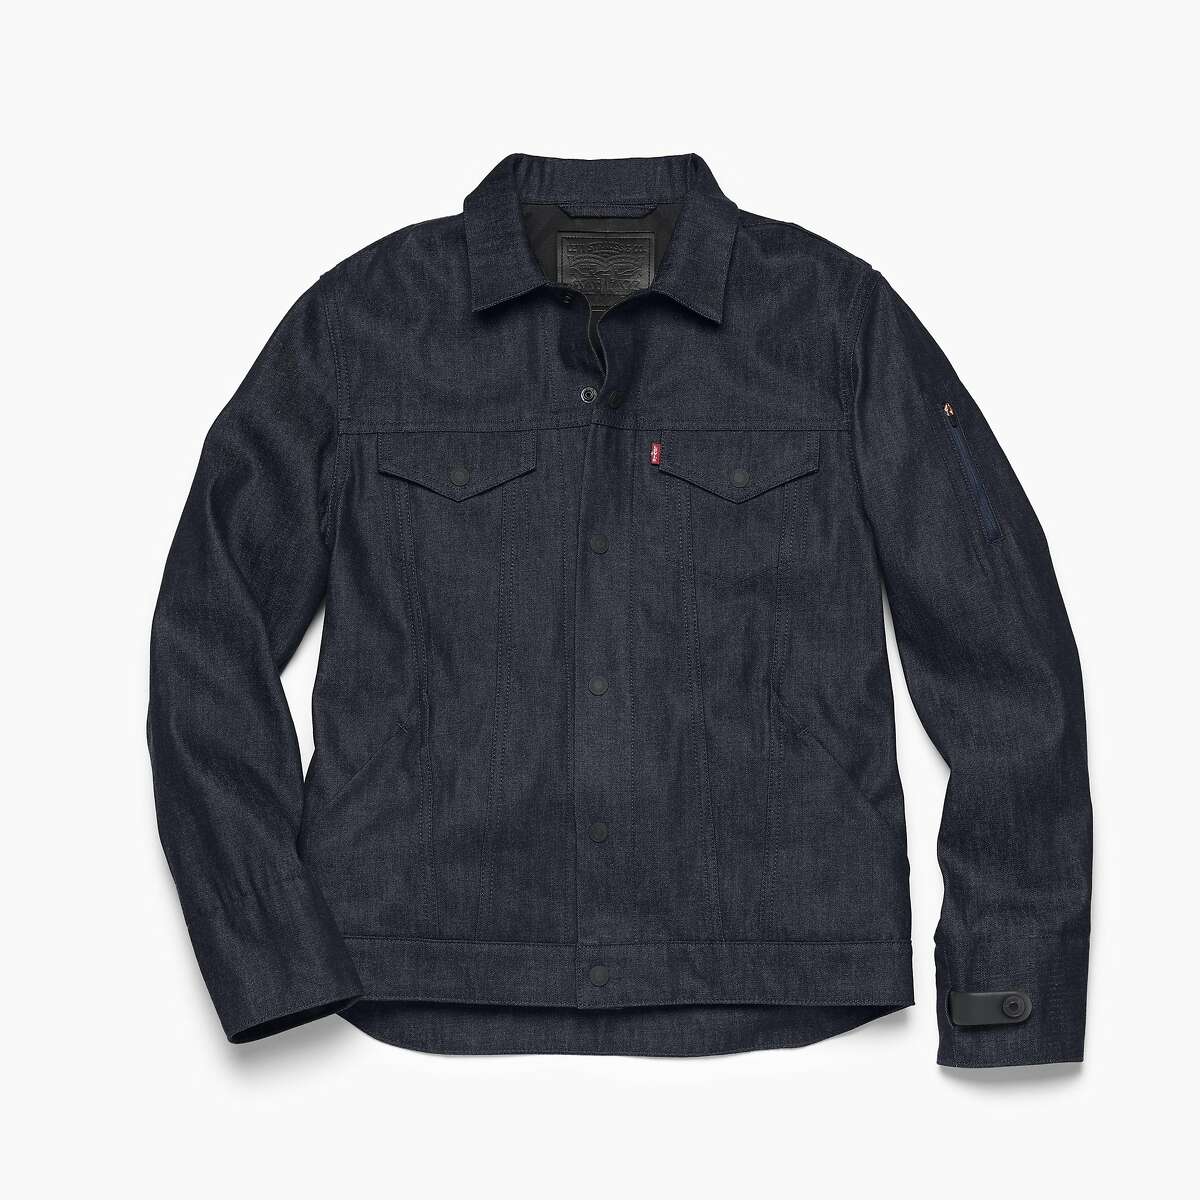 Levi's Google Jacquard trucker jacket, the first collaboration between the tech company and a fashion brand, will hit stores in spring 2017.